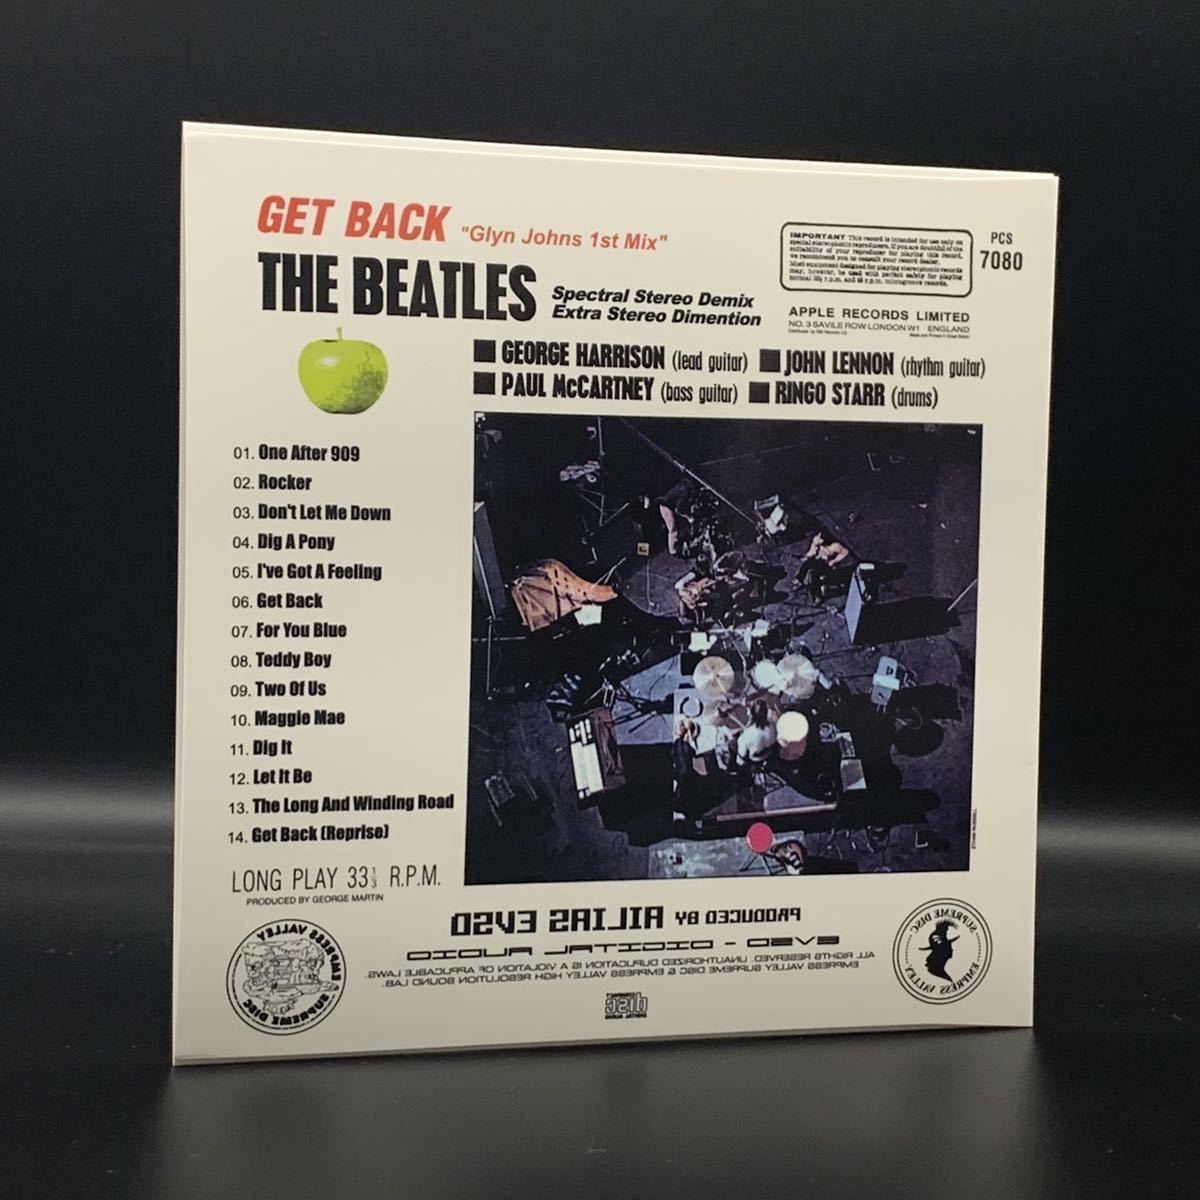 THE BEATLES : GET BACK STEREO DEMIX (CD) 1CD 工場プレス銀盤CD ■欧米輸入限定盤　■限定100セット 通常盤ジャケ違い！_画像4